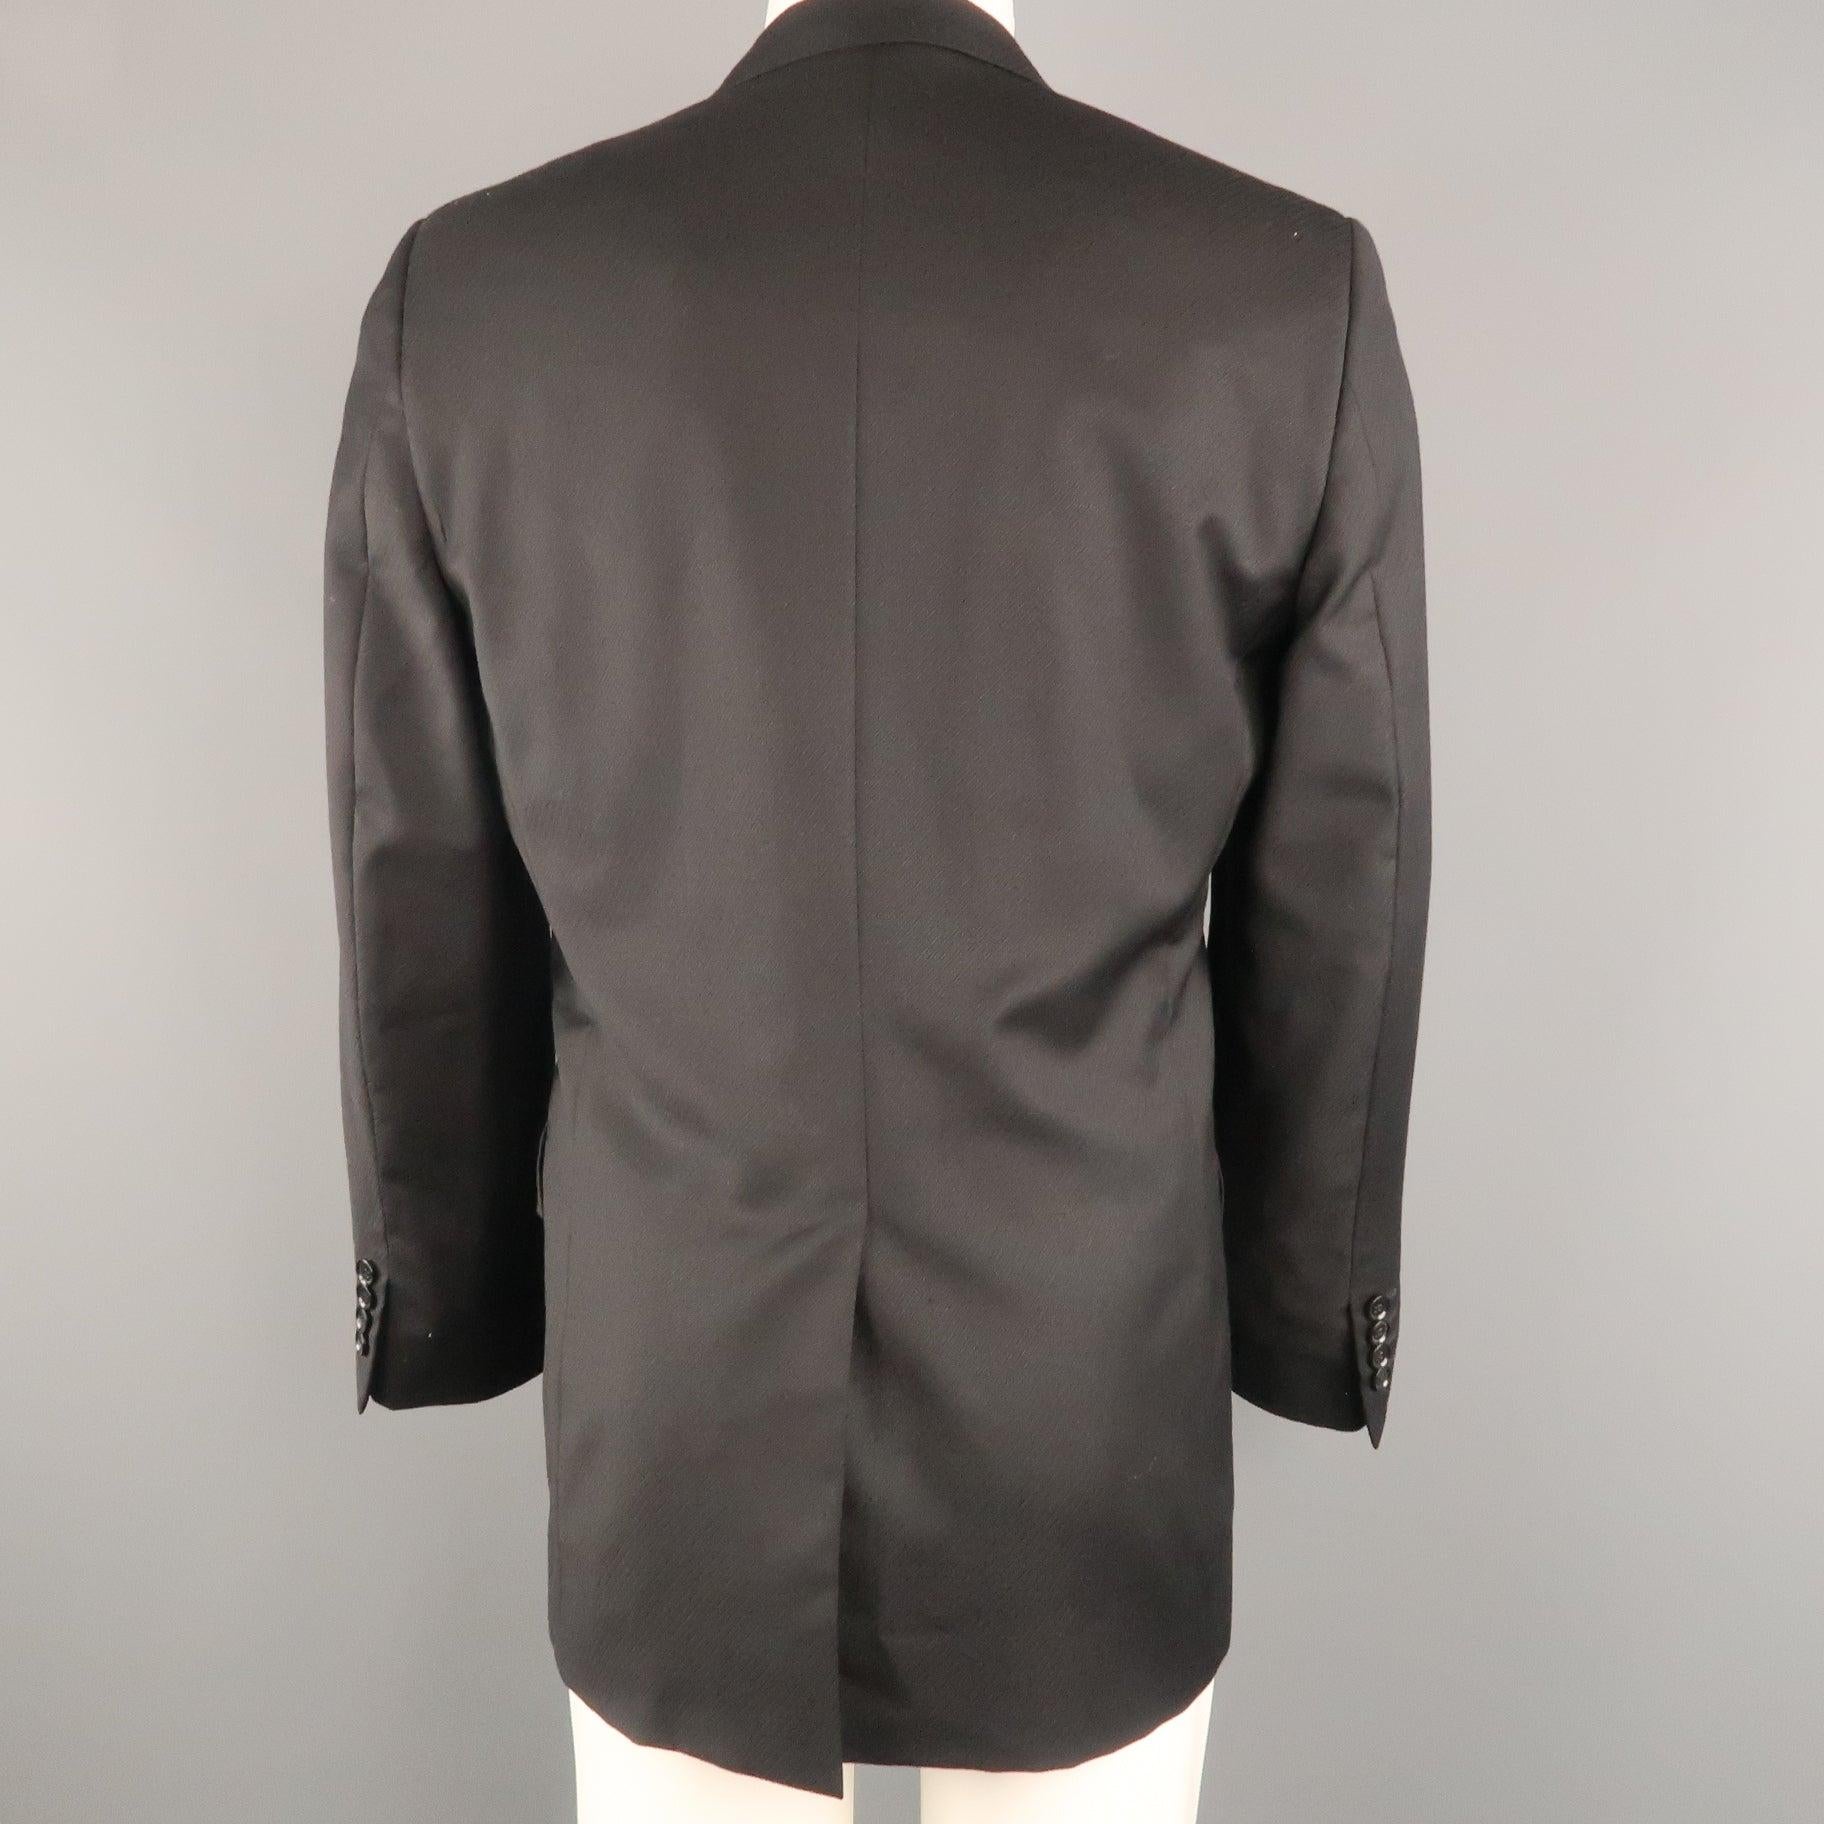 DOLCE & GABBANA sport coat comes in diagonal stripe textured wool with a top stitch notch lapel, single breasted, 
three button front, and flap pockets. Made in Italy. Excellent Pre-Owned Condition.  

Marked:   IT 48 

Measurements: 
 
Shoulder: 17